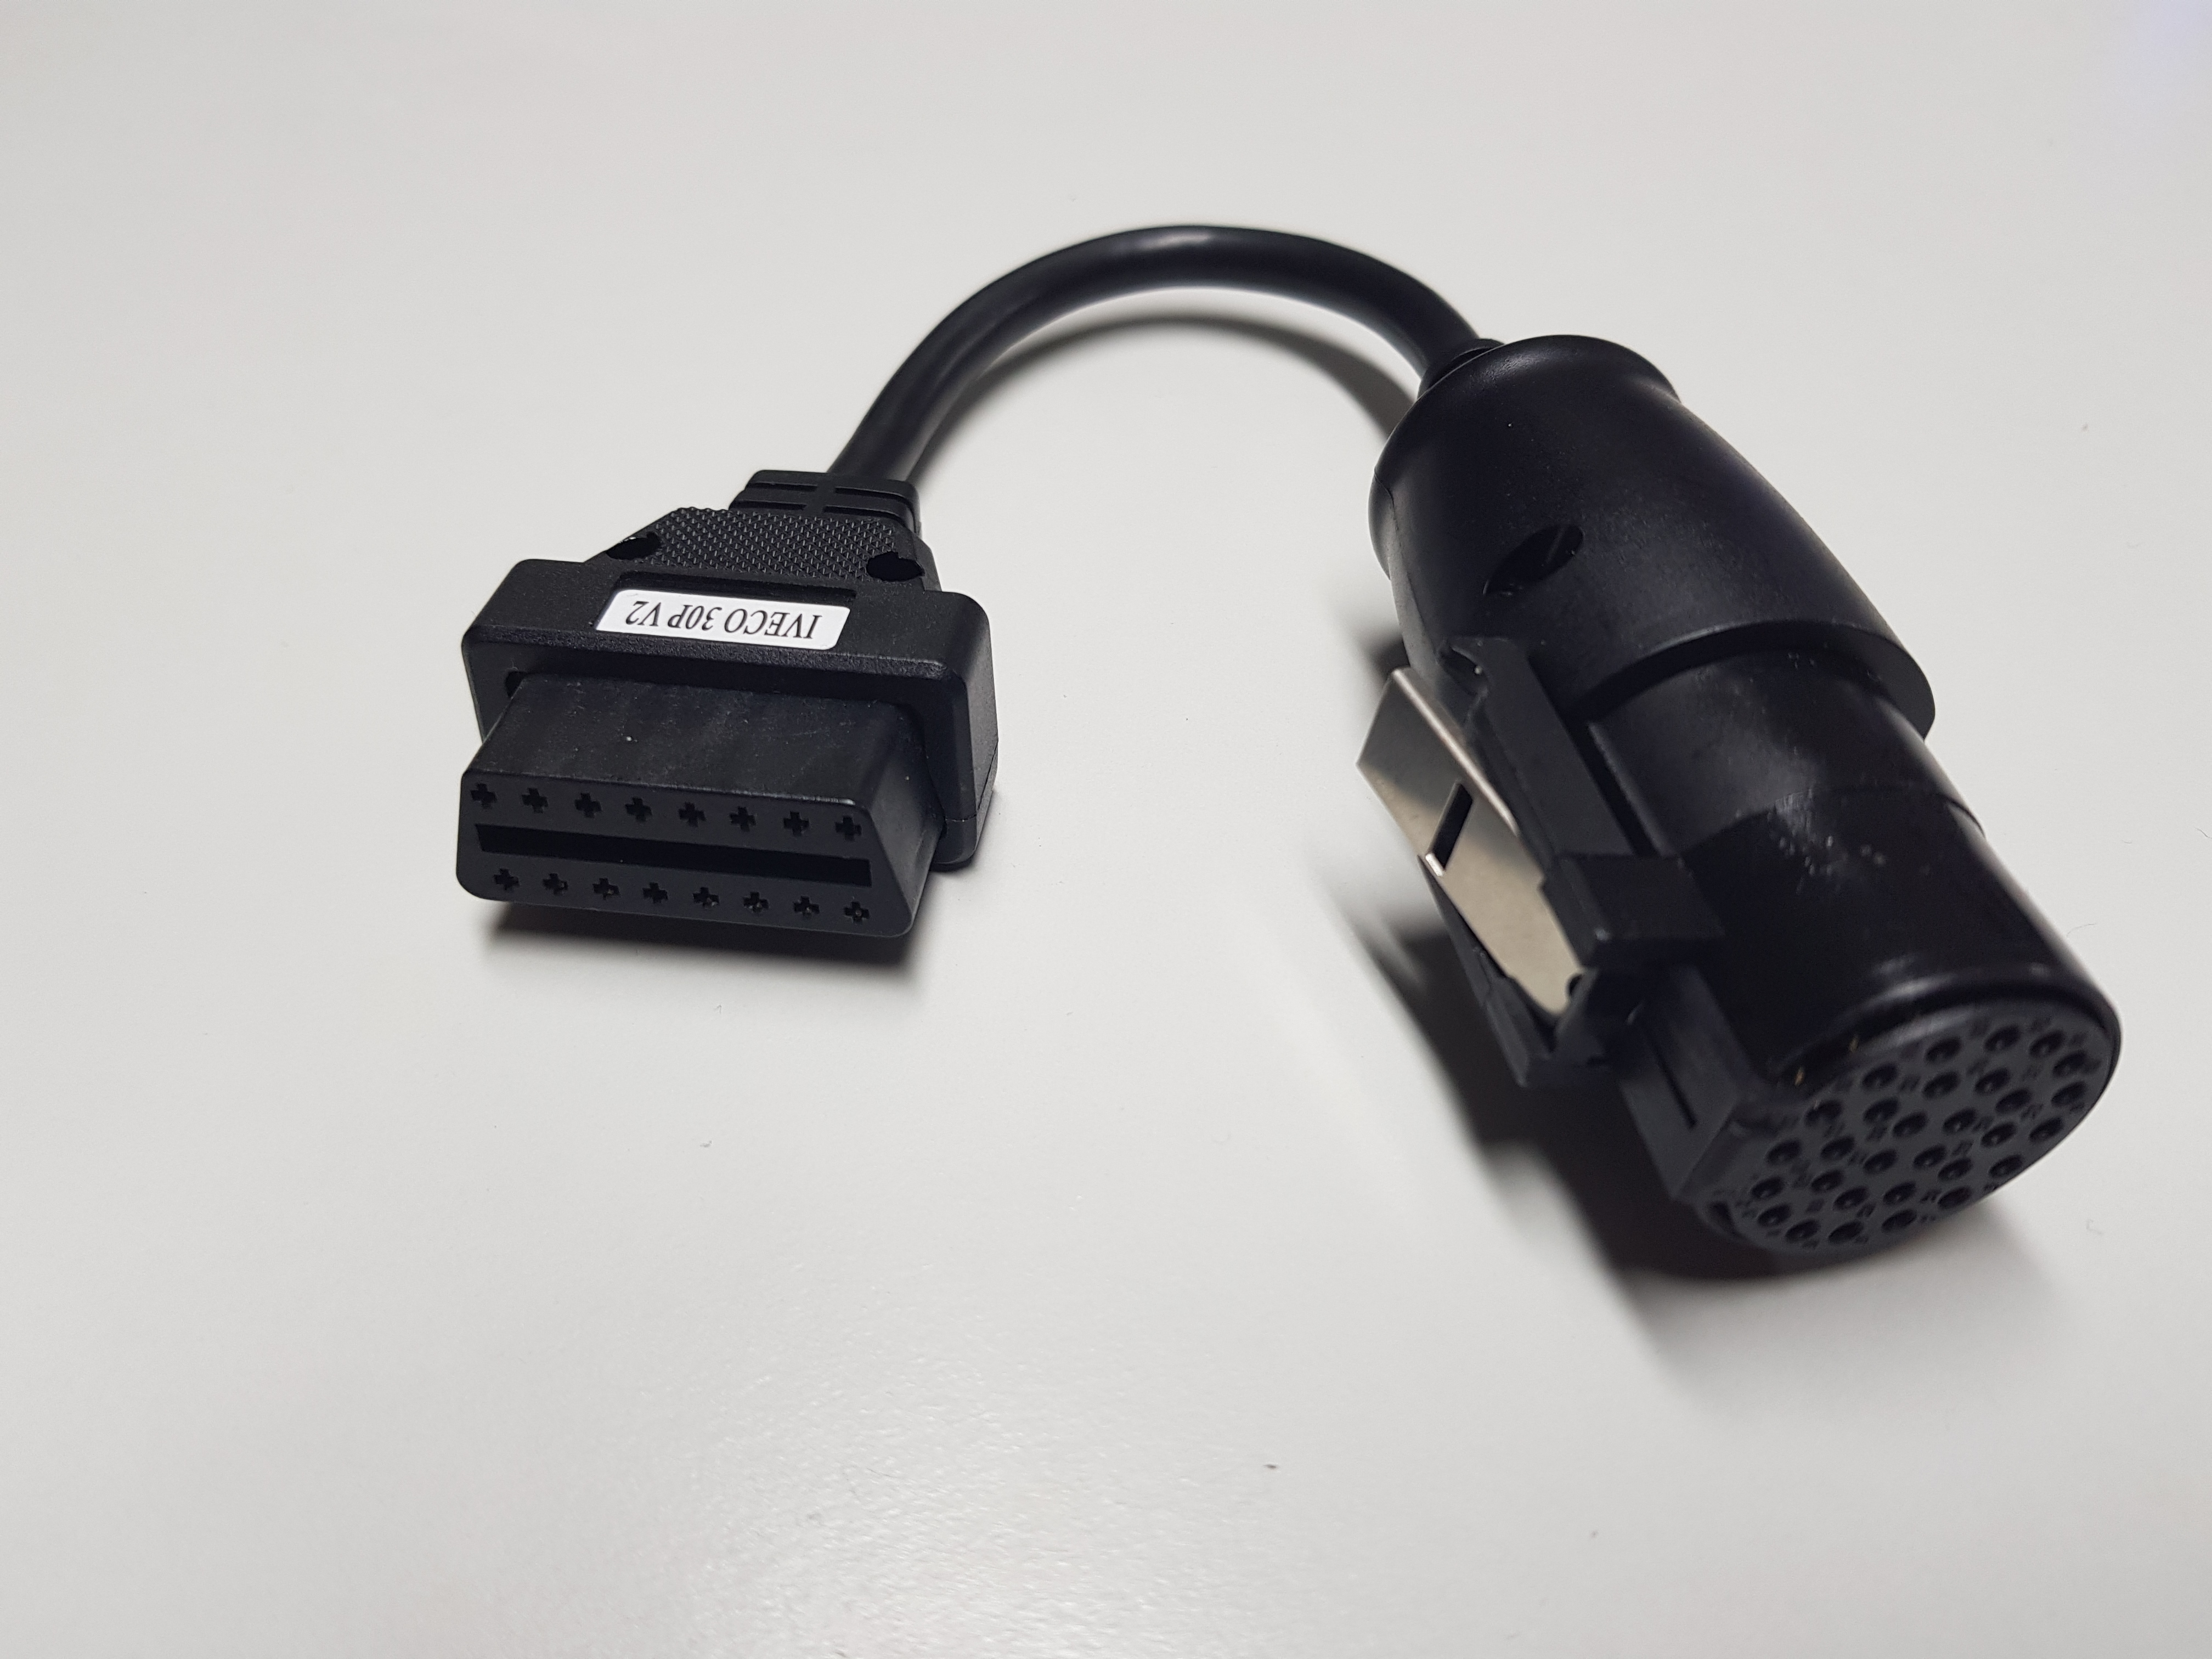 obd pin 7 8 connection in the adapter